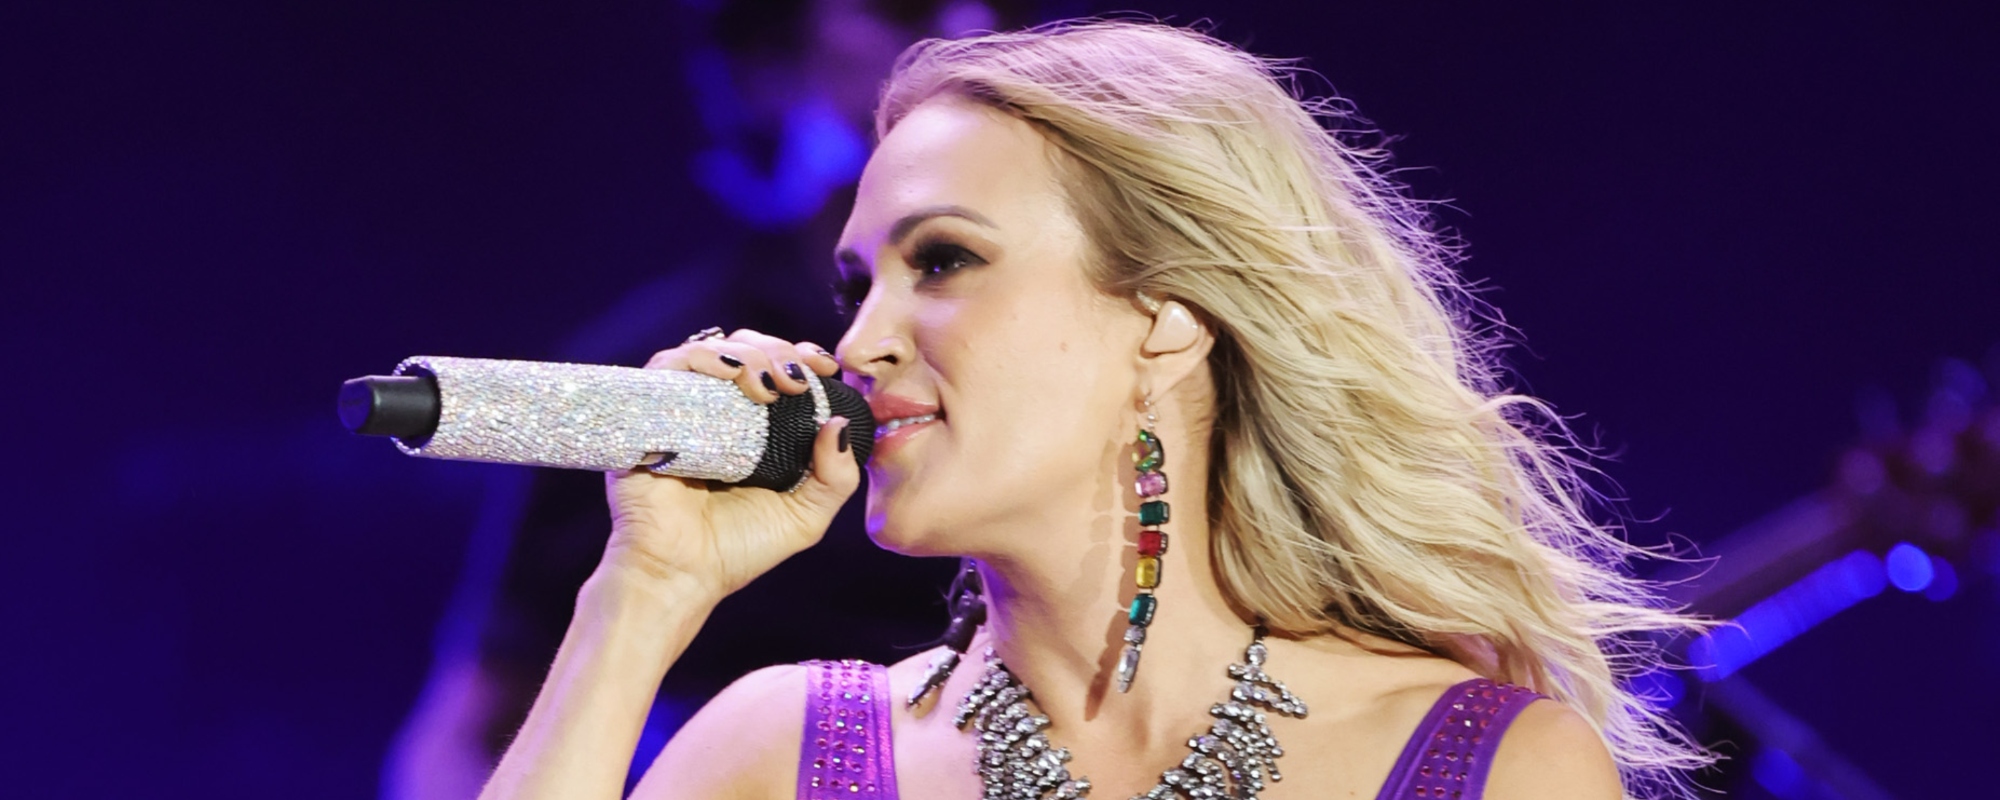 Fan Hops on Stage to Serenade Carrie Underwood on Her Birthday—Whole Crowd Joins In